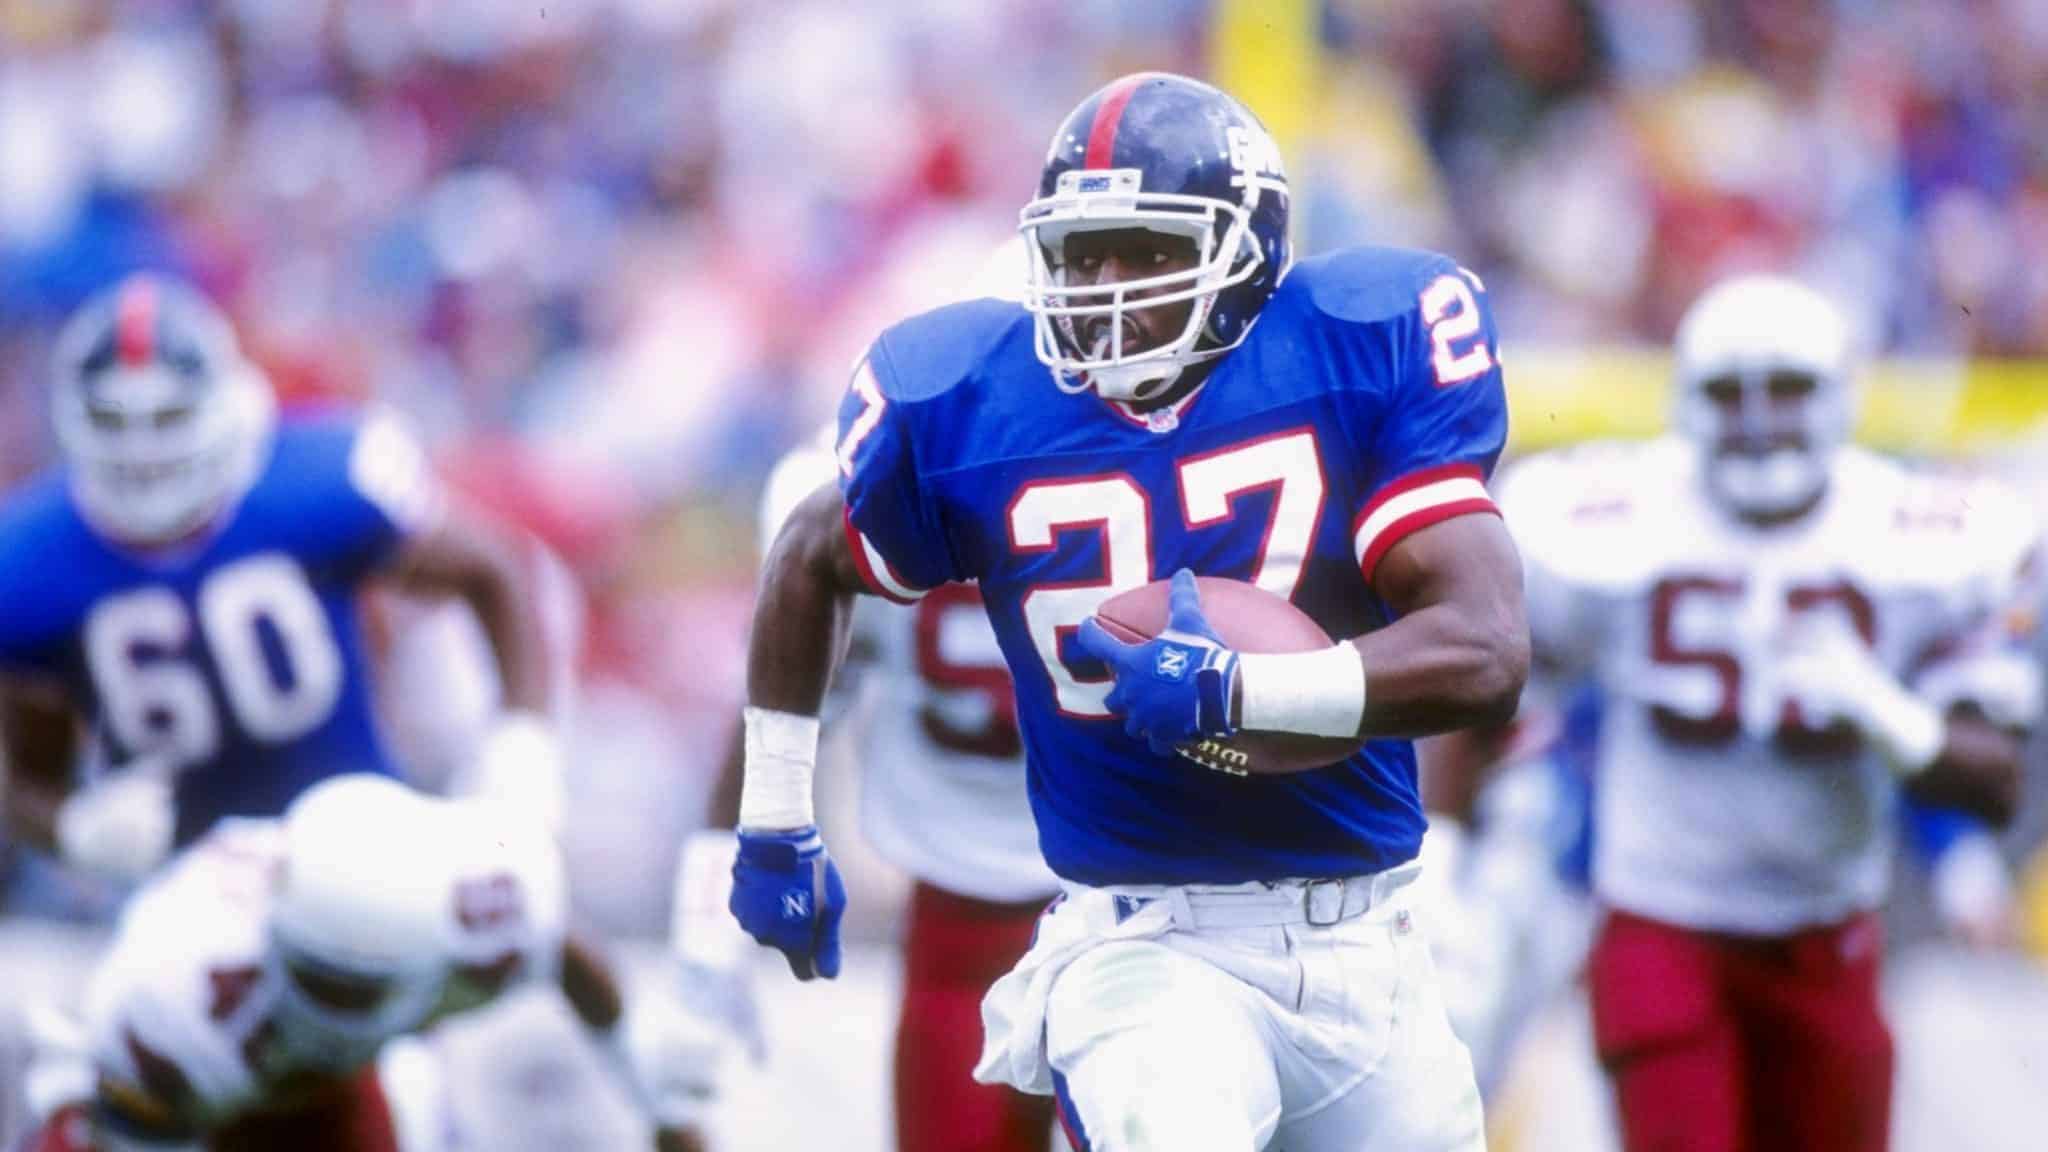 10 Nov 1991: Running back Rodney Hampton of the New York Giants runs with the ball during a game against the Phoenix Cardinals at Sun Devil Stadium in Tempe, Arizona. The Giants won the game 21-14.